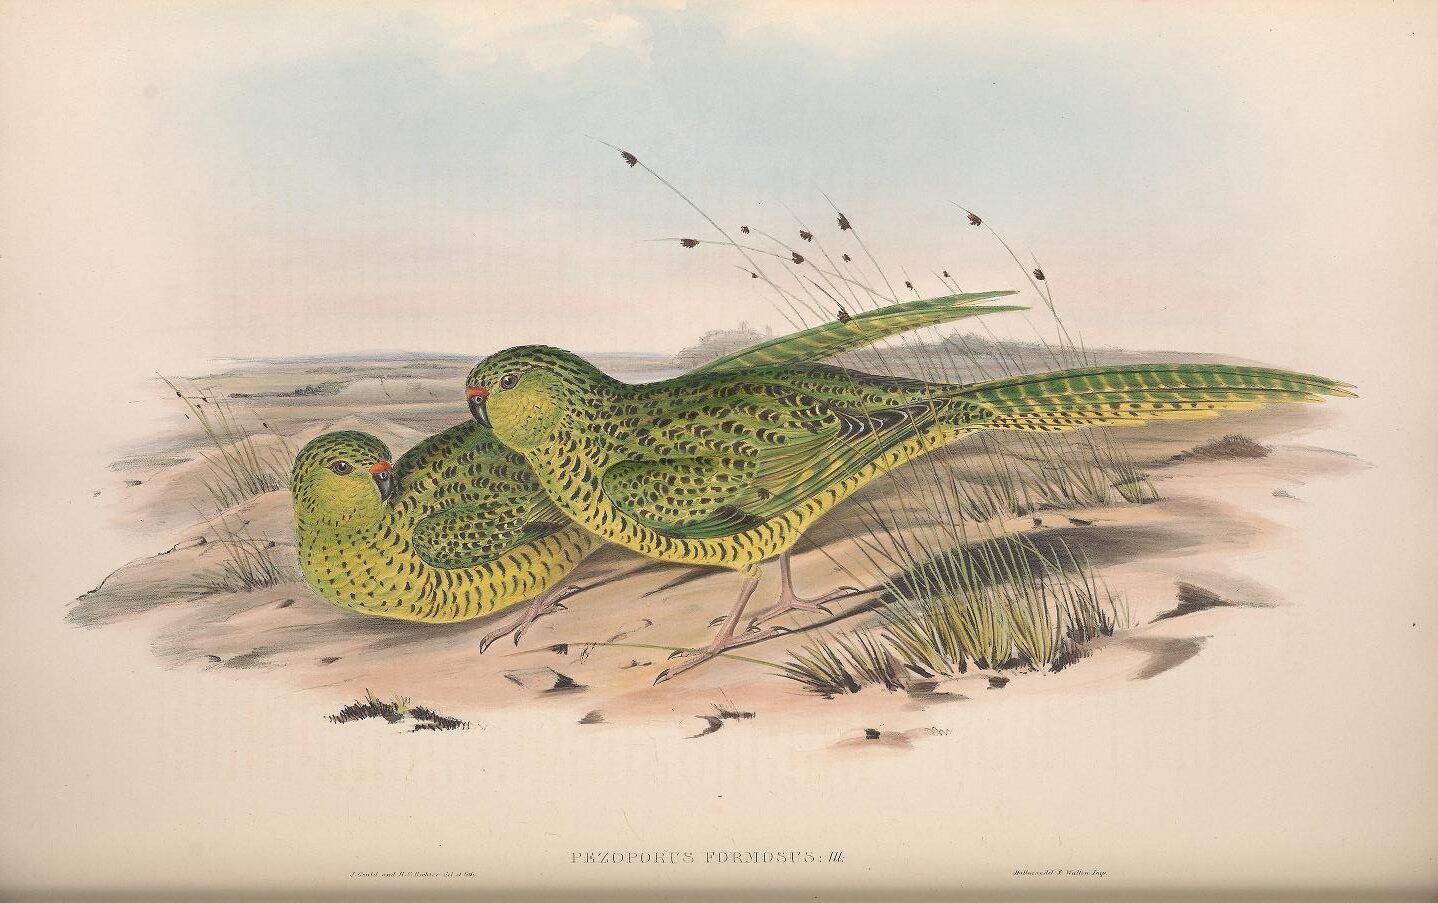 Ground parrakeet illustration from Gould's "The Birds of Australia"